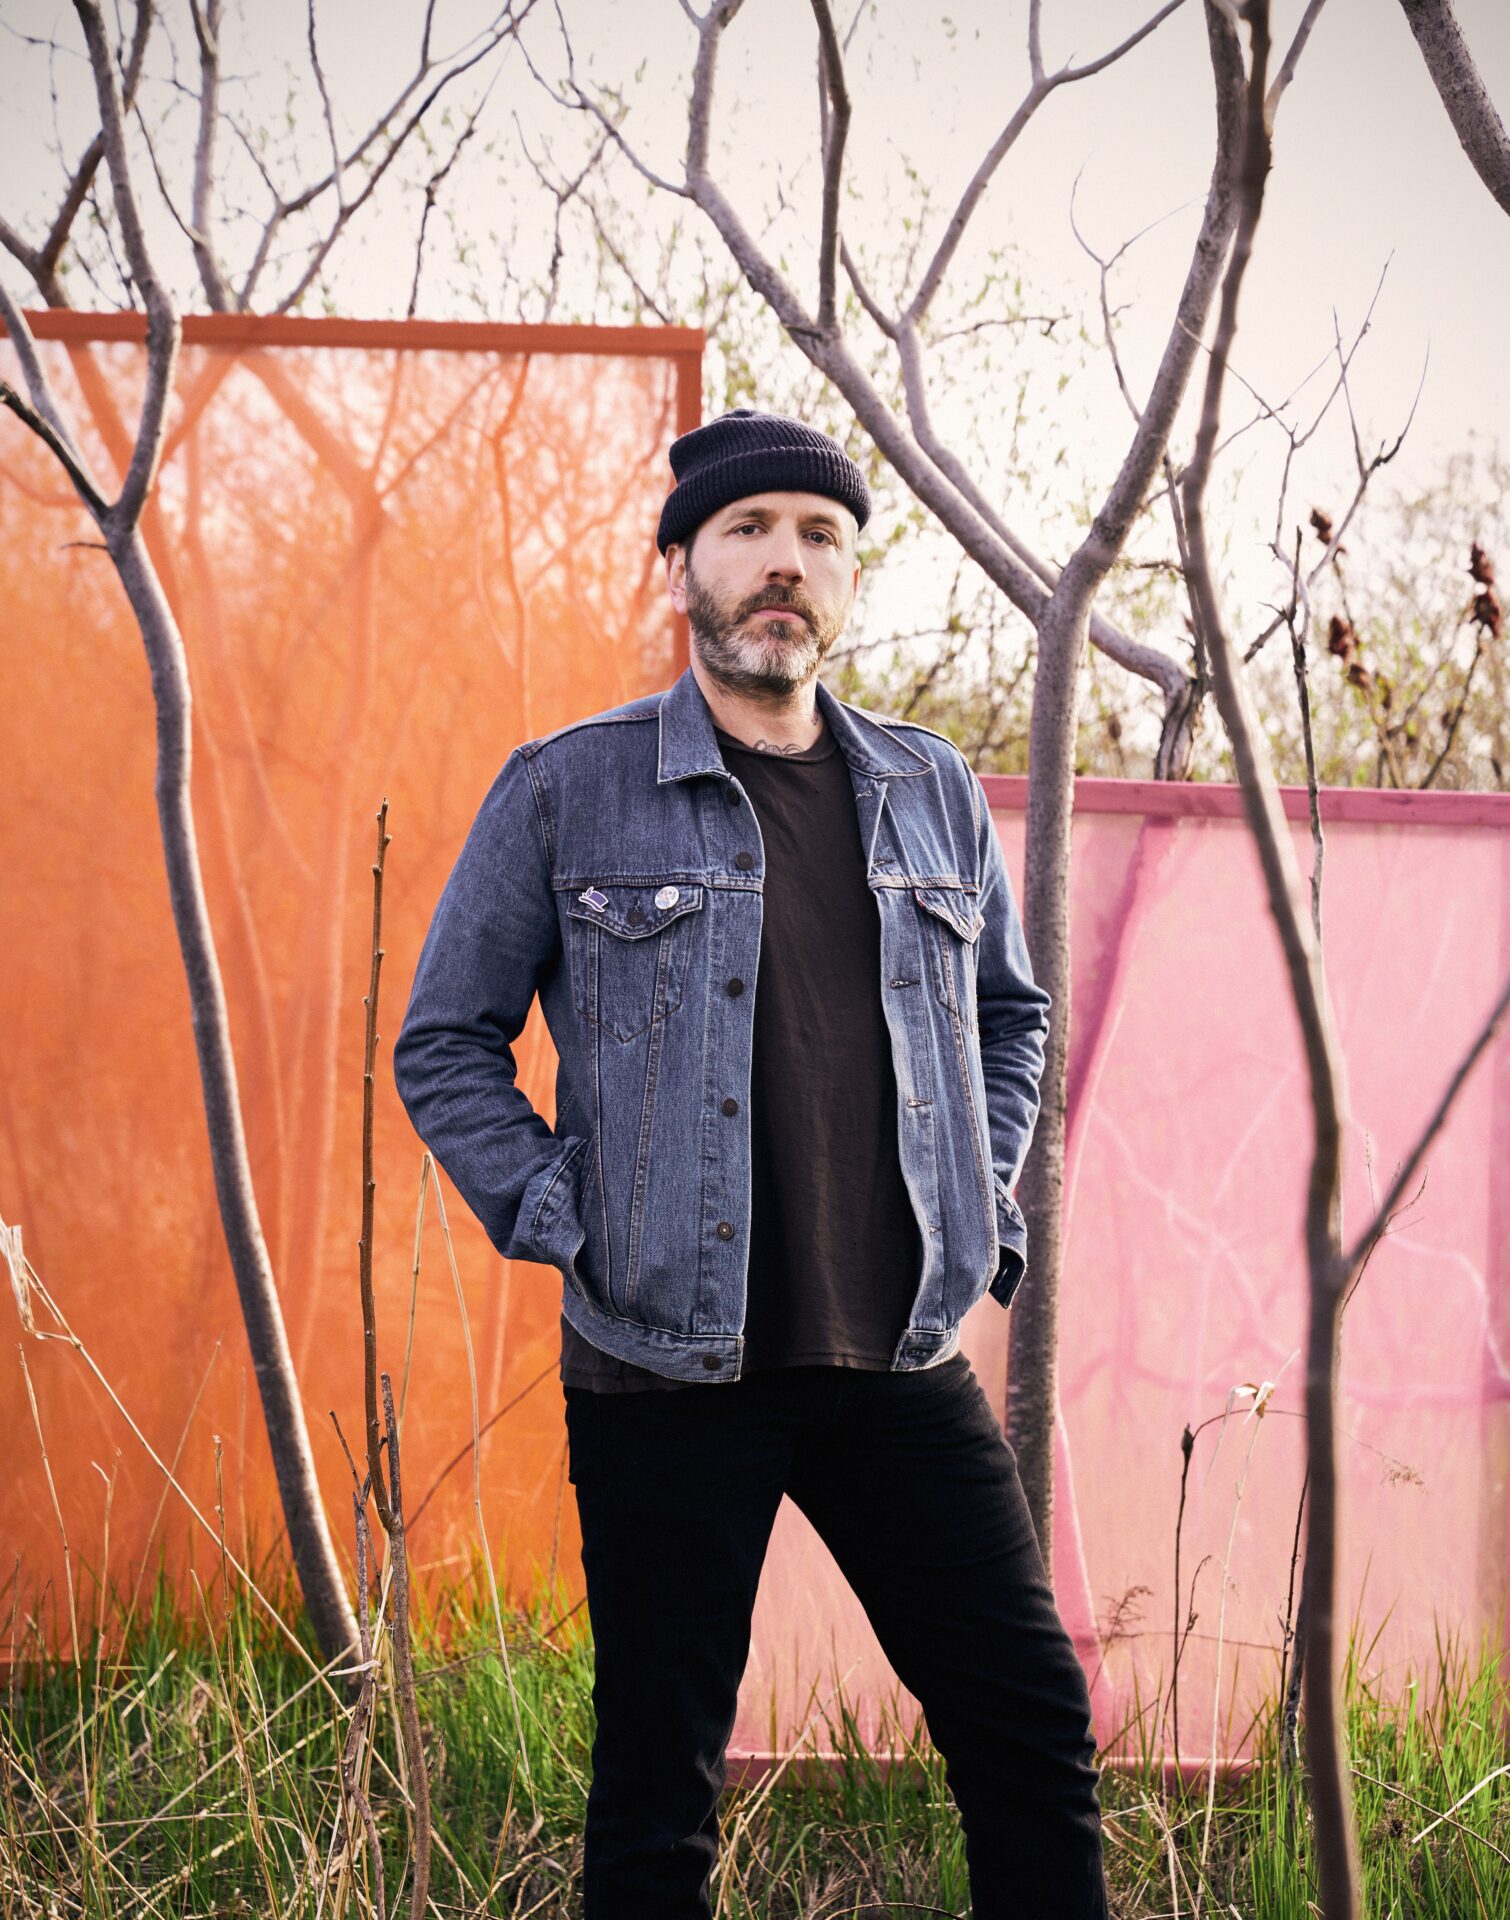 City and Colour drop first song in four years, announces new tour